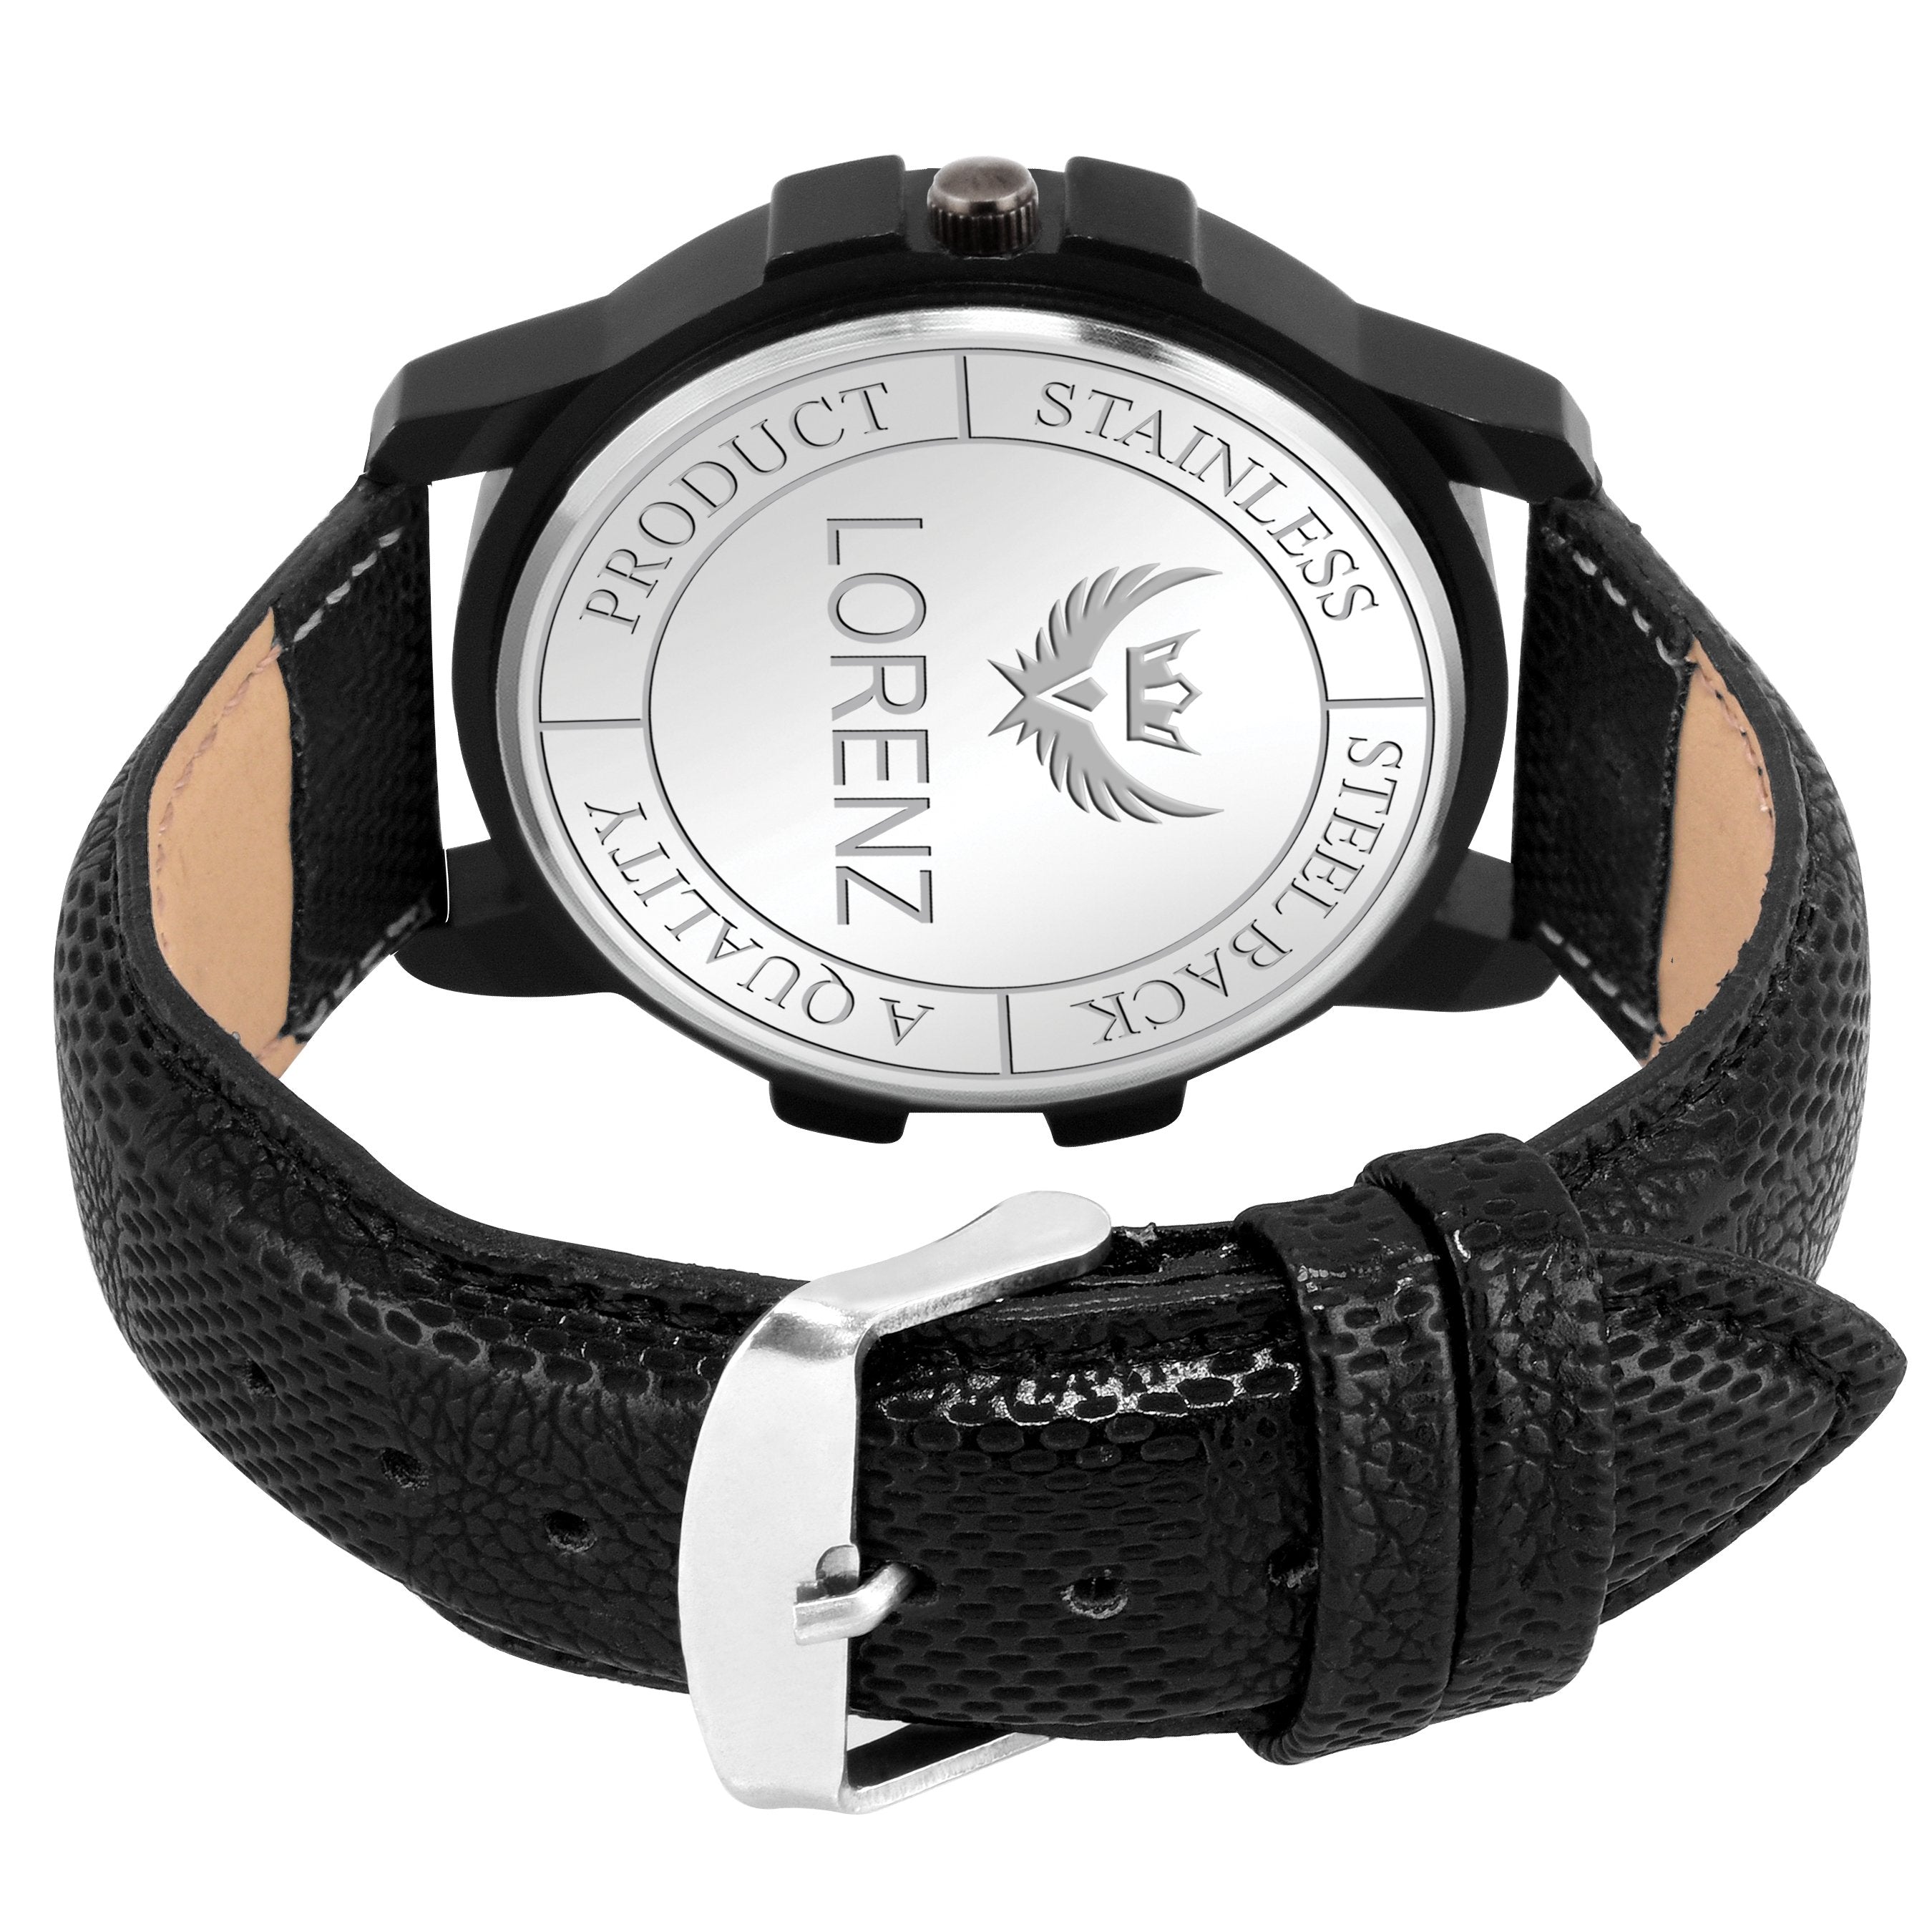 Lorenz Analogue Black Dial Leather Strap Day & Date Watch for Men